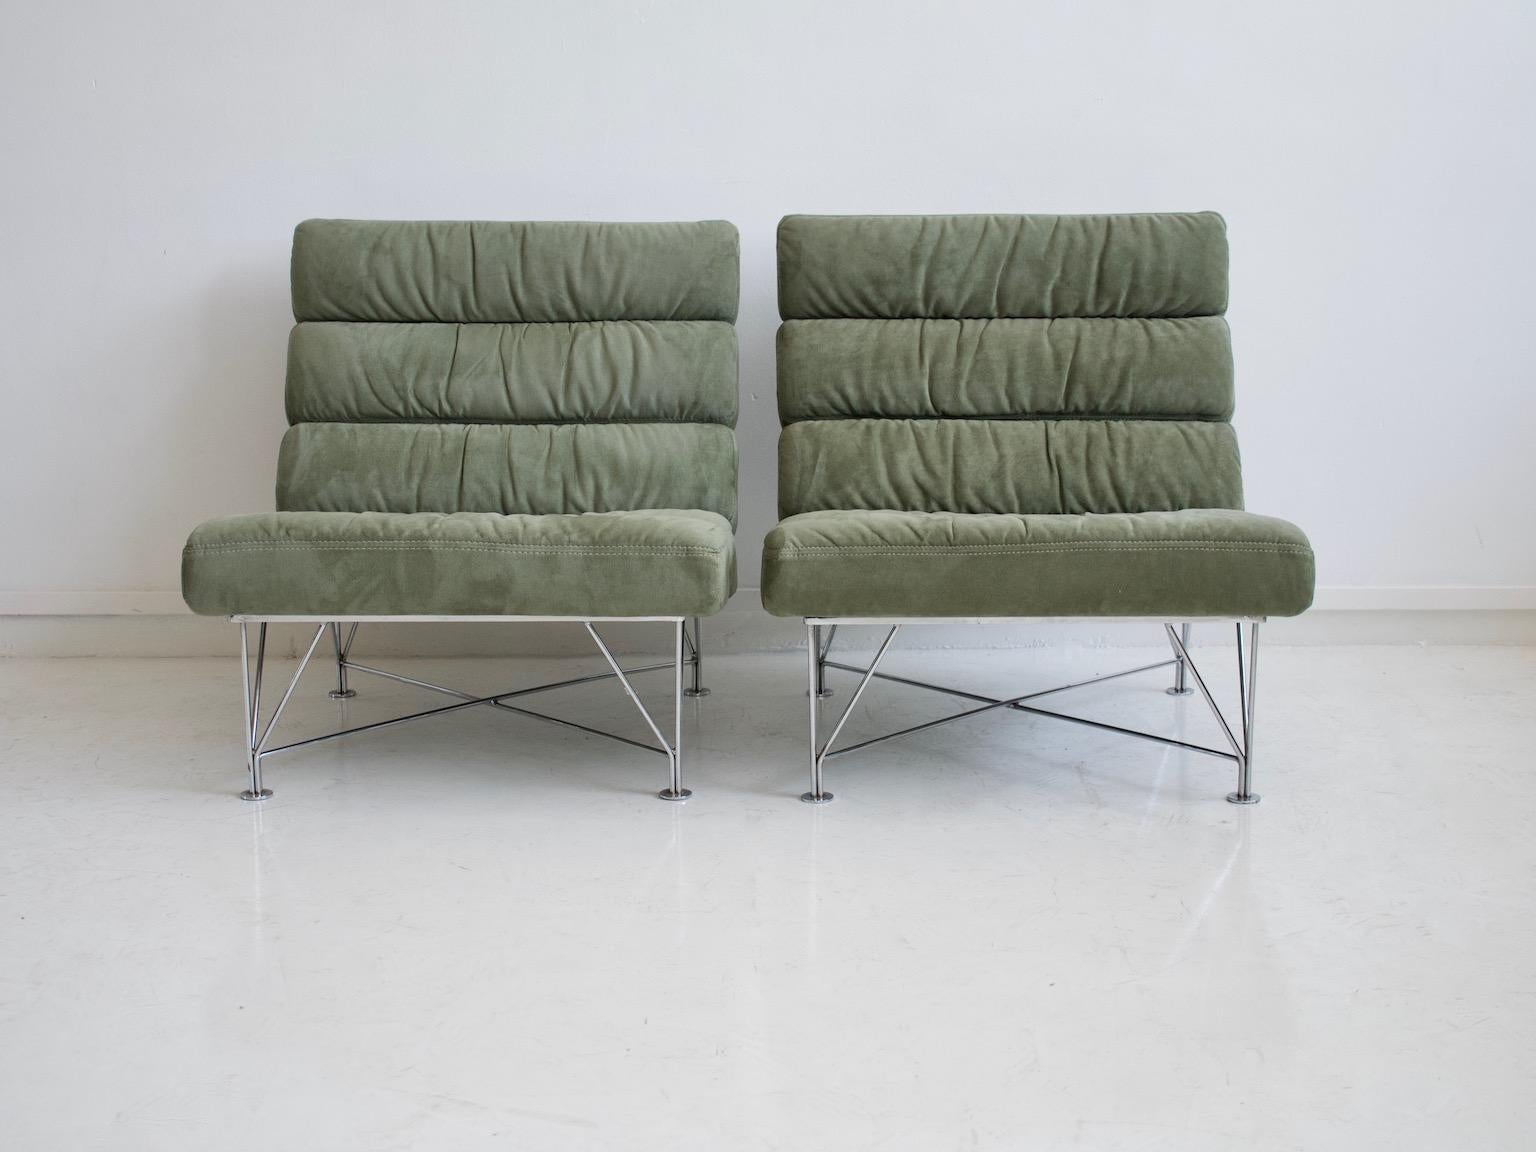 Pair of lounge chairs, model Spider, by DUX design team. Designed in 1982. Structure made of chrome-plated steel wire, covers of sage green Alcantara fabric. One chair marked with label.